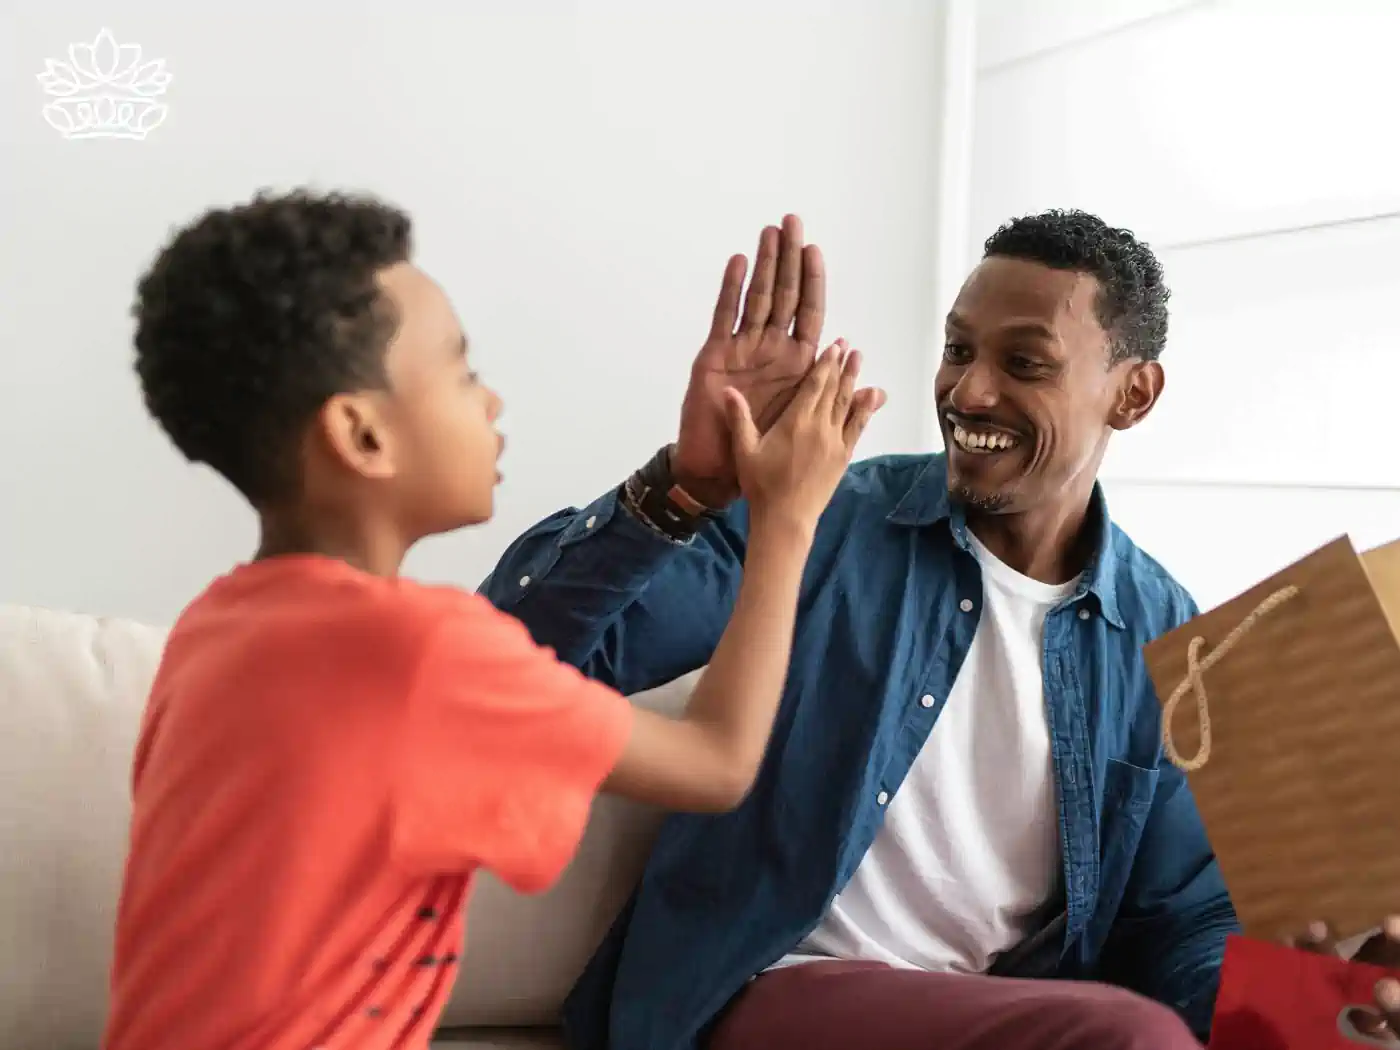 A joyful father and his young son high-fiving on a sofa, celebrating a moment of happiness together. The father holds a gift bag, suggesting a special occasion. 